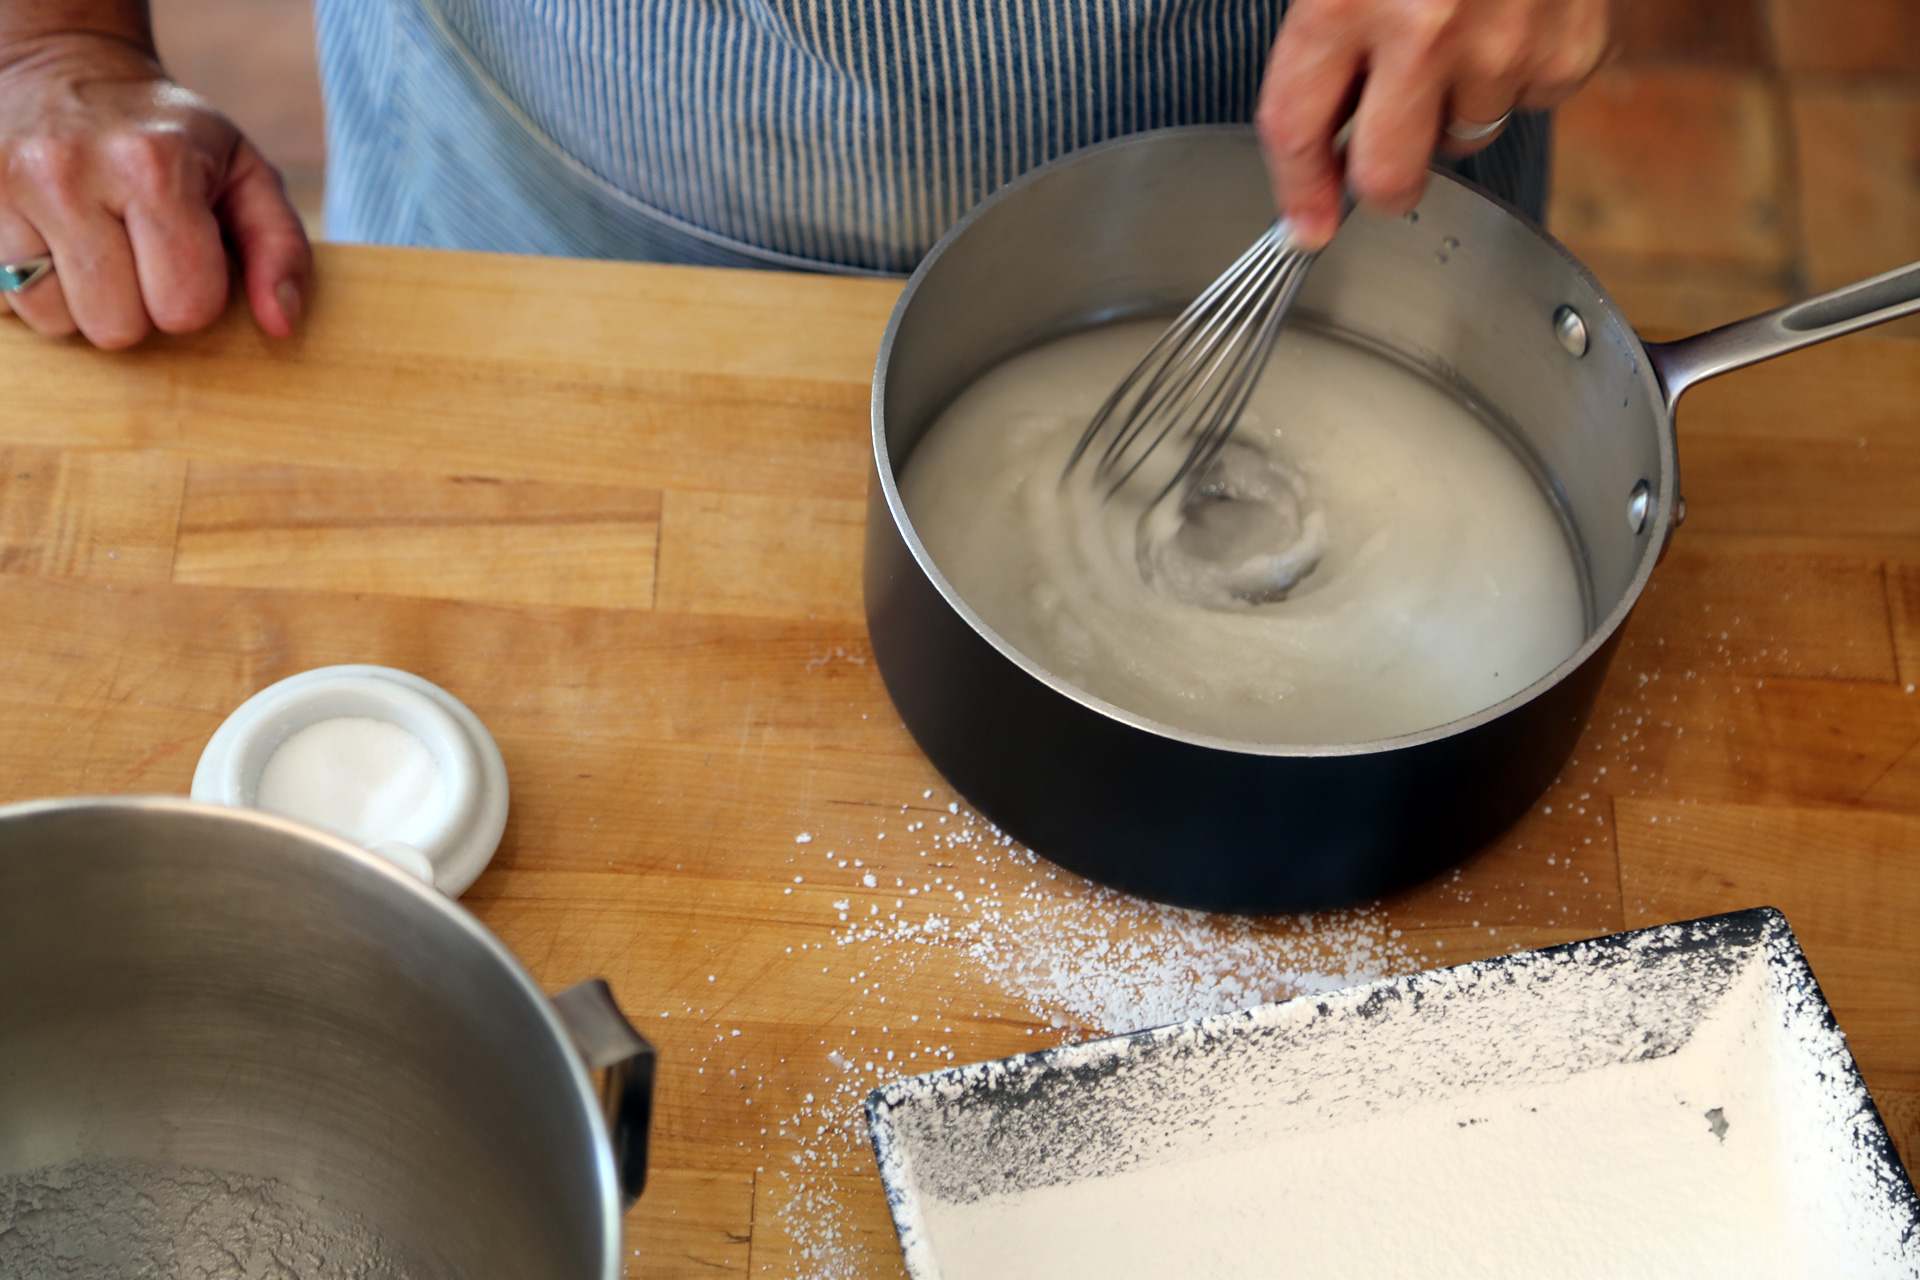 In a saucepan, stir together ½ cup water, the granulated sugar, and the corn syrup.